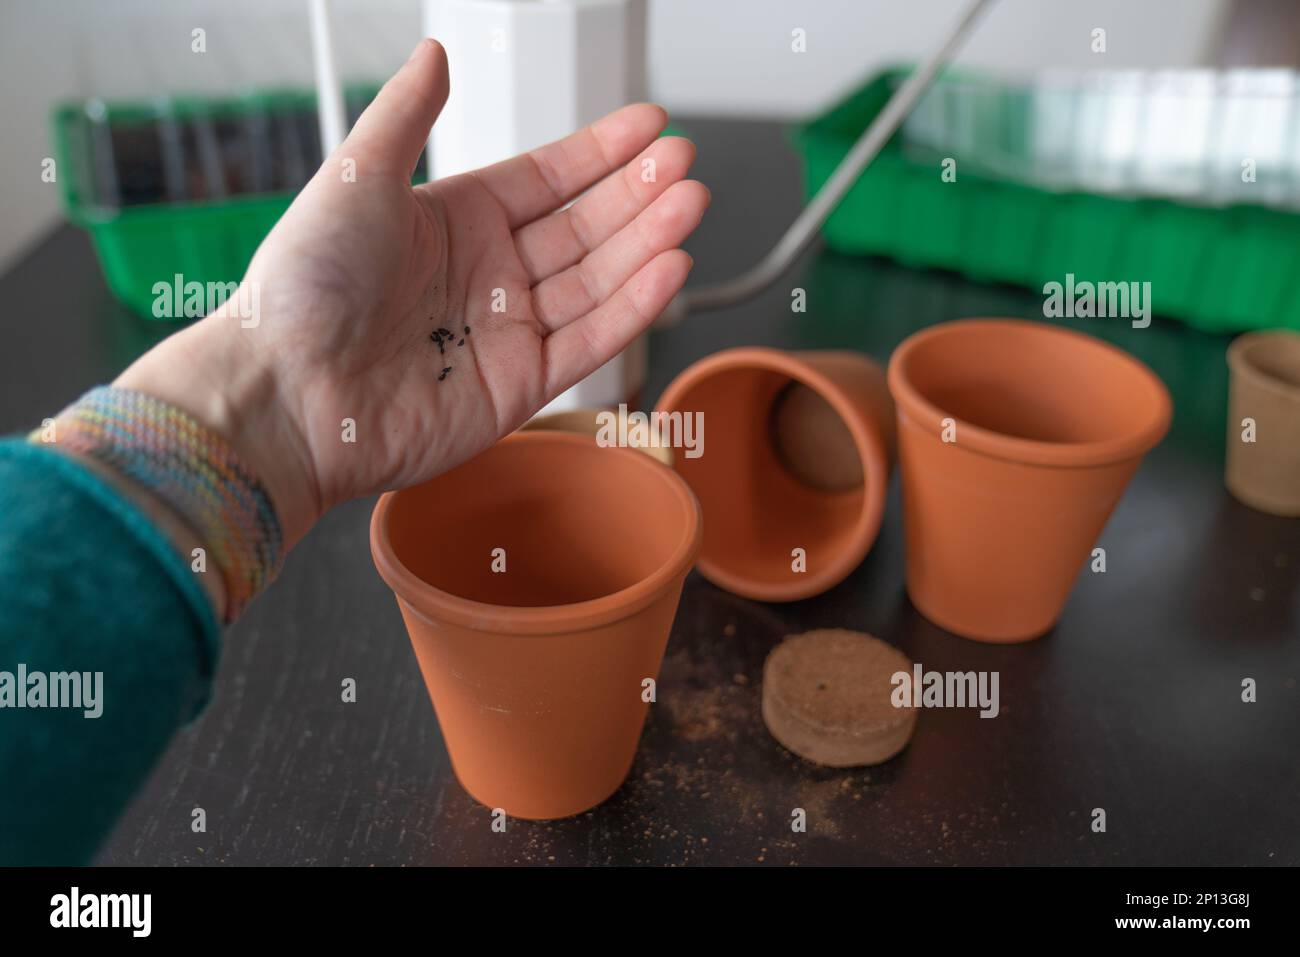 Hand on the background of pots, planting seeds. Stock Photo